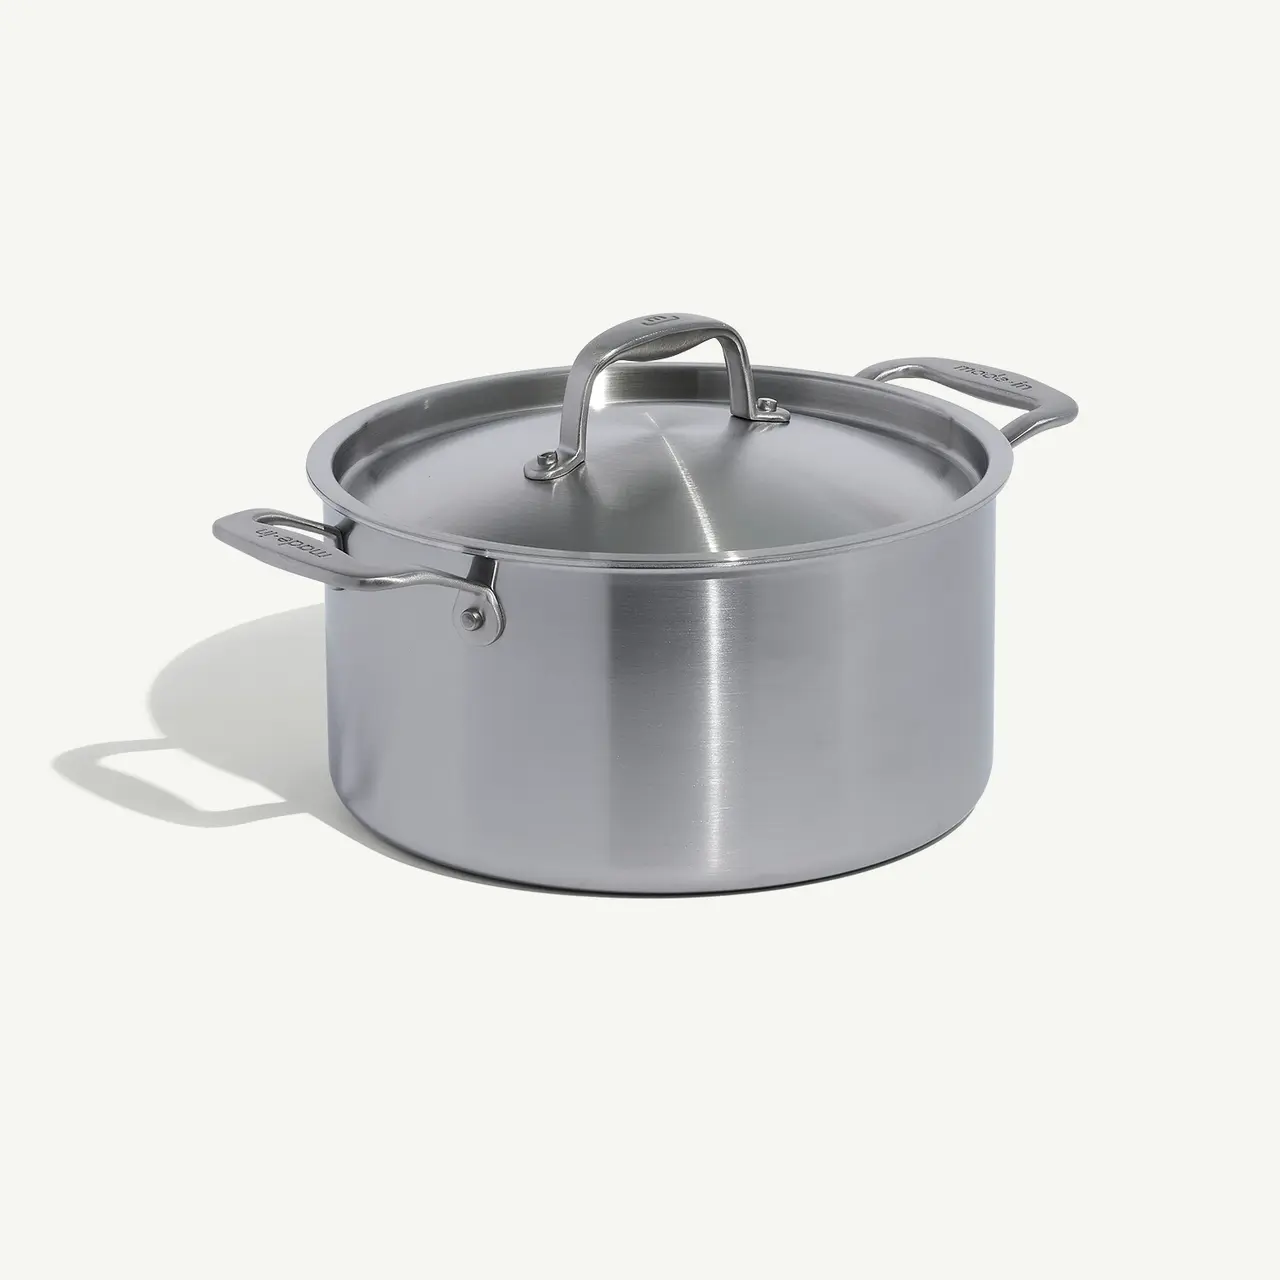 A stainless steel pot with a lid, resting on a plain surface casting a soft shadow.